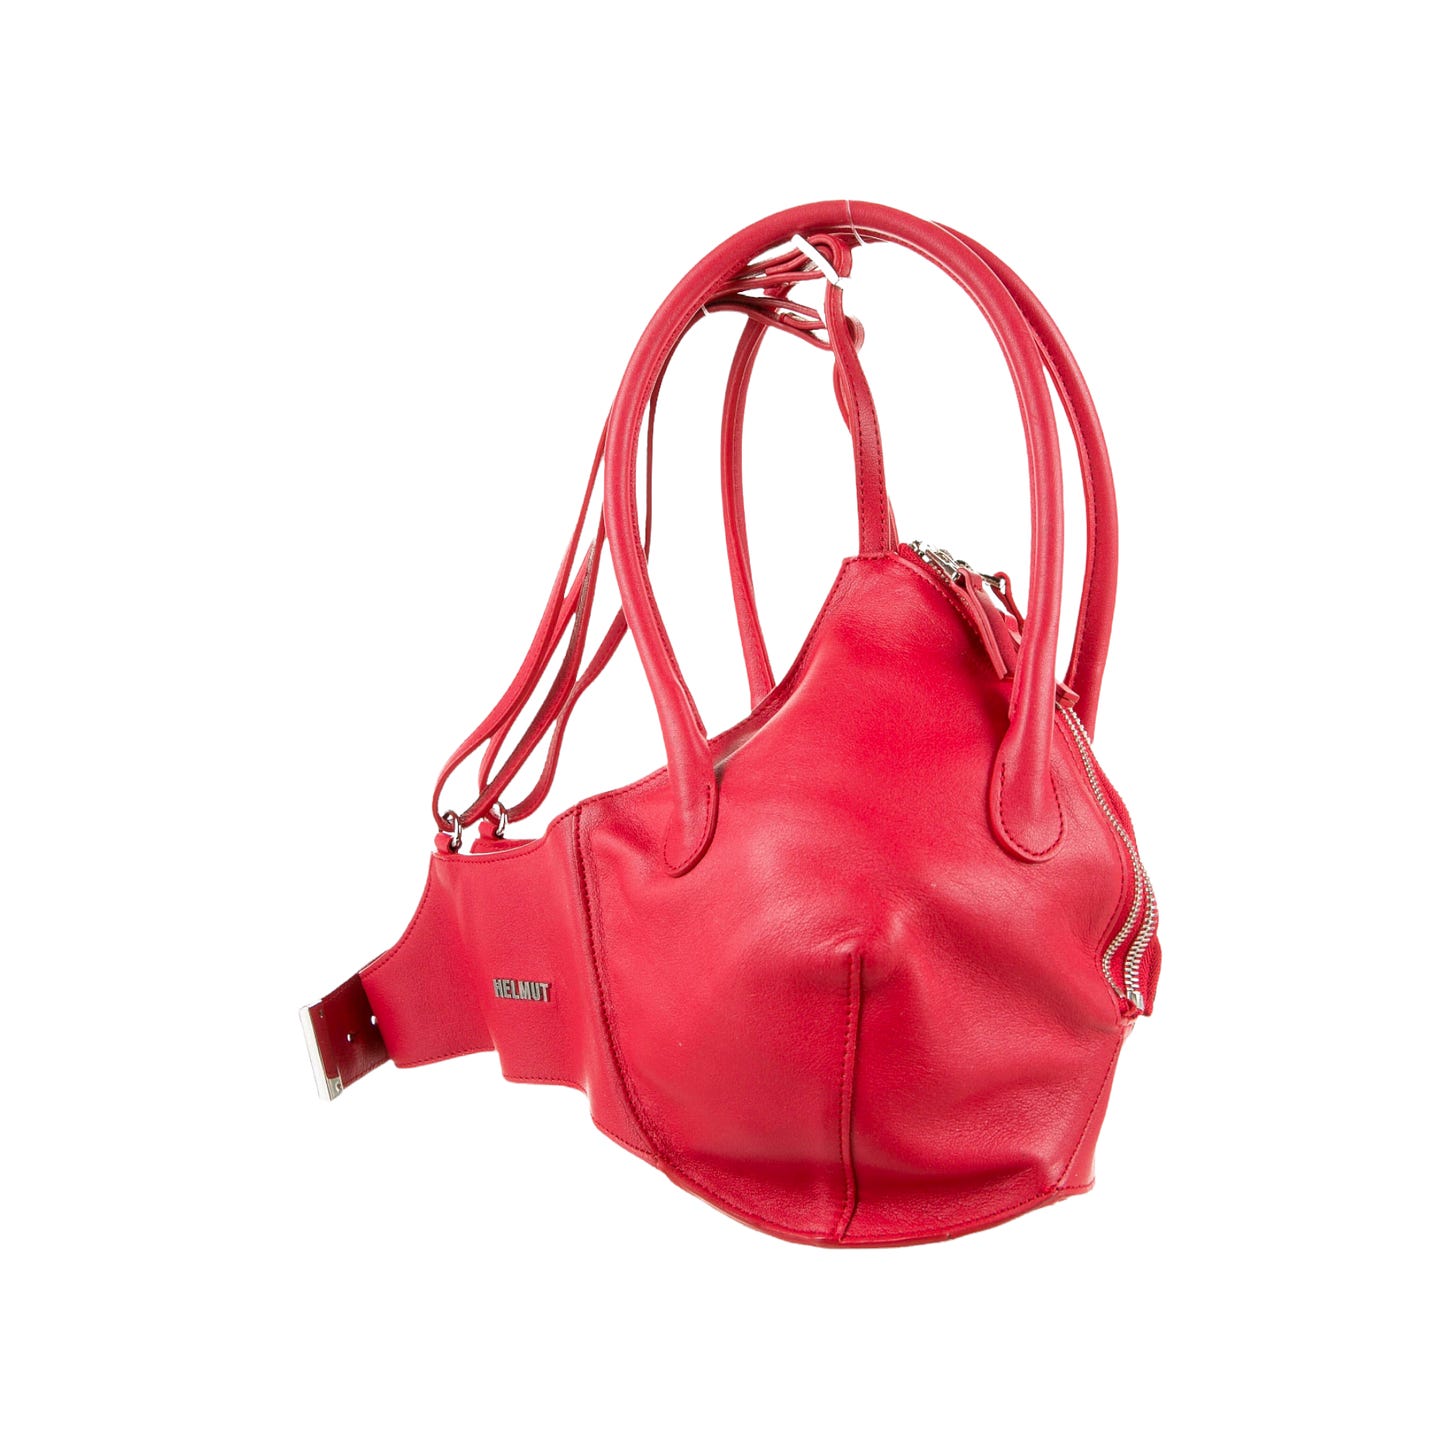 Helmut Lang SS18 Bra bag (Shayne Oliver) – As You Can See